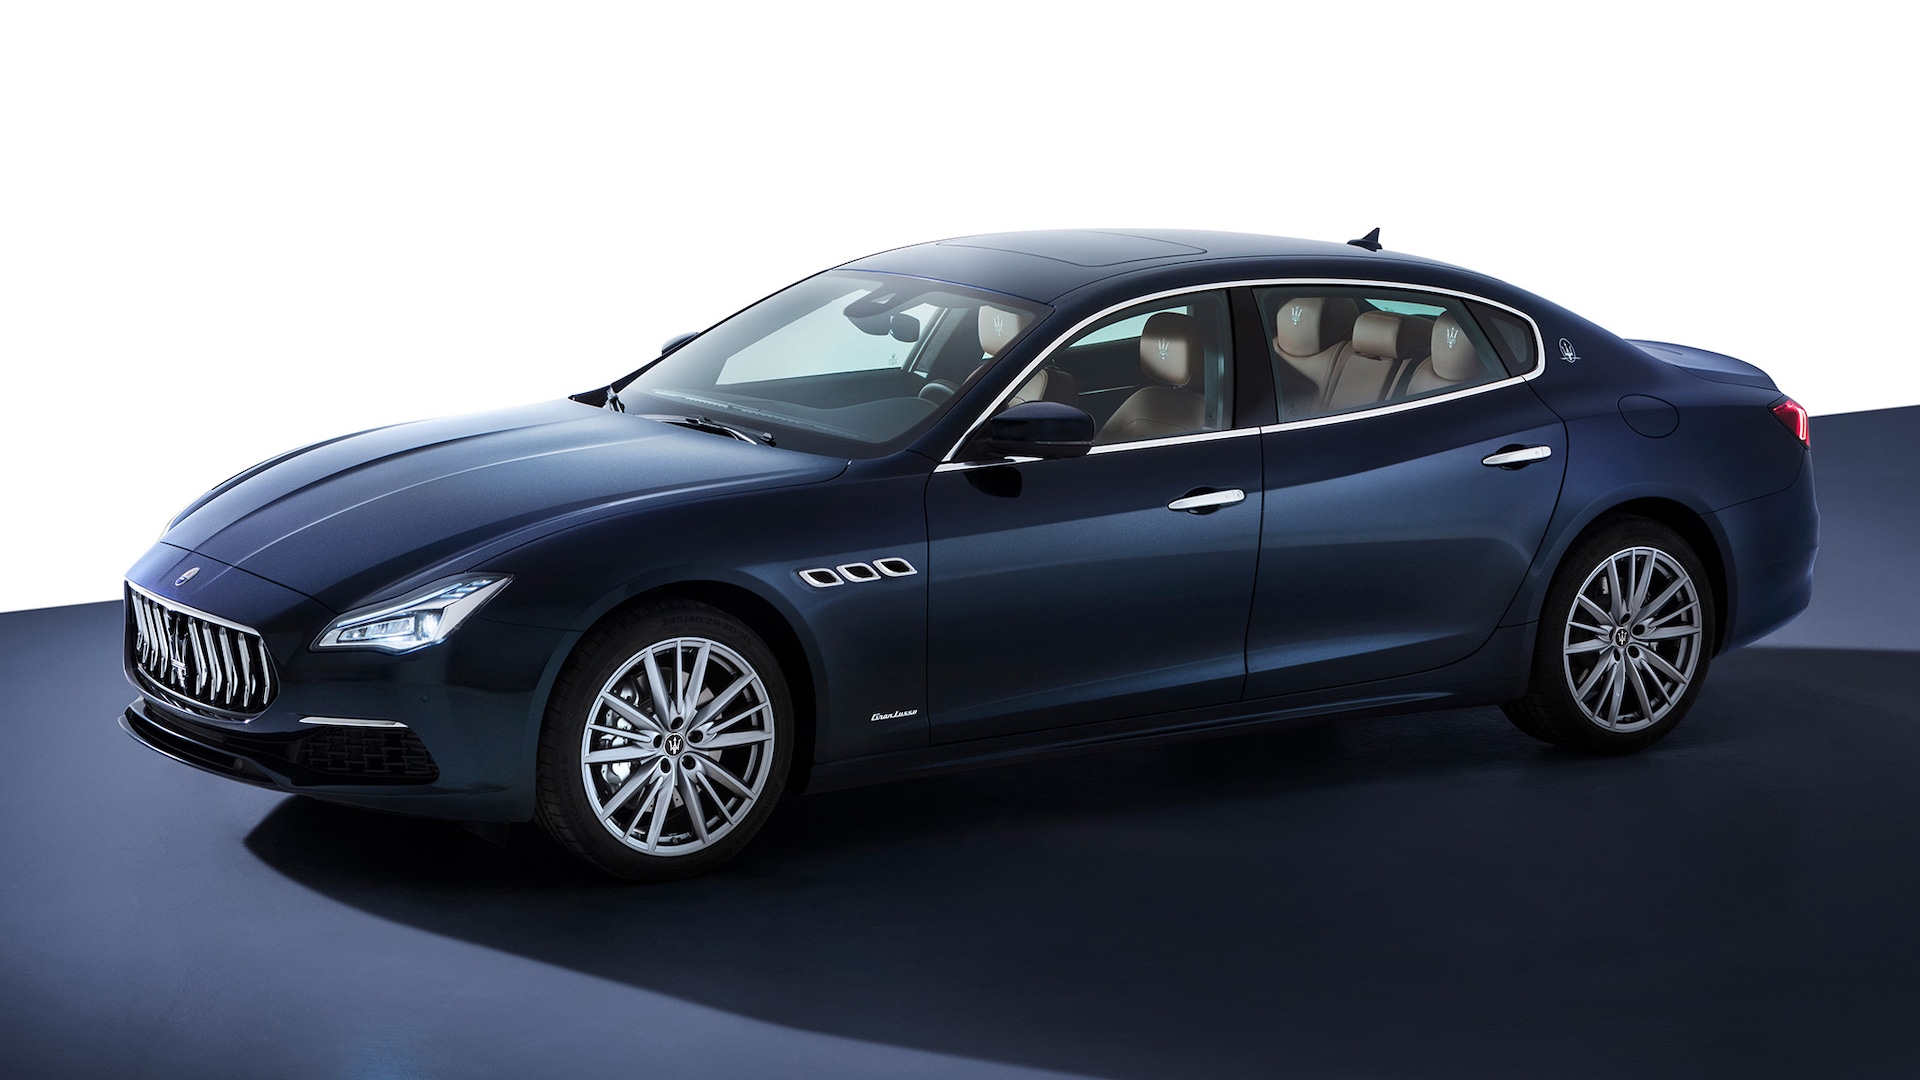 2022 Maserati Quattroporte Prices, Reviews, and Photos - MotorTrend